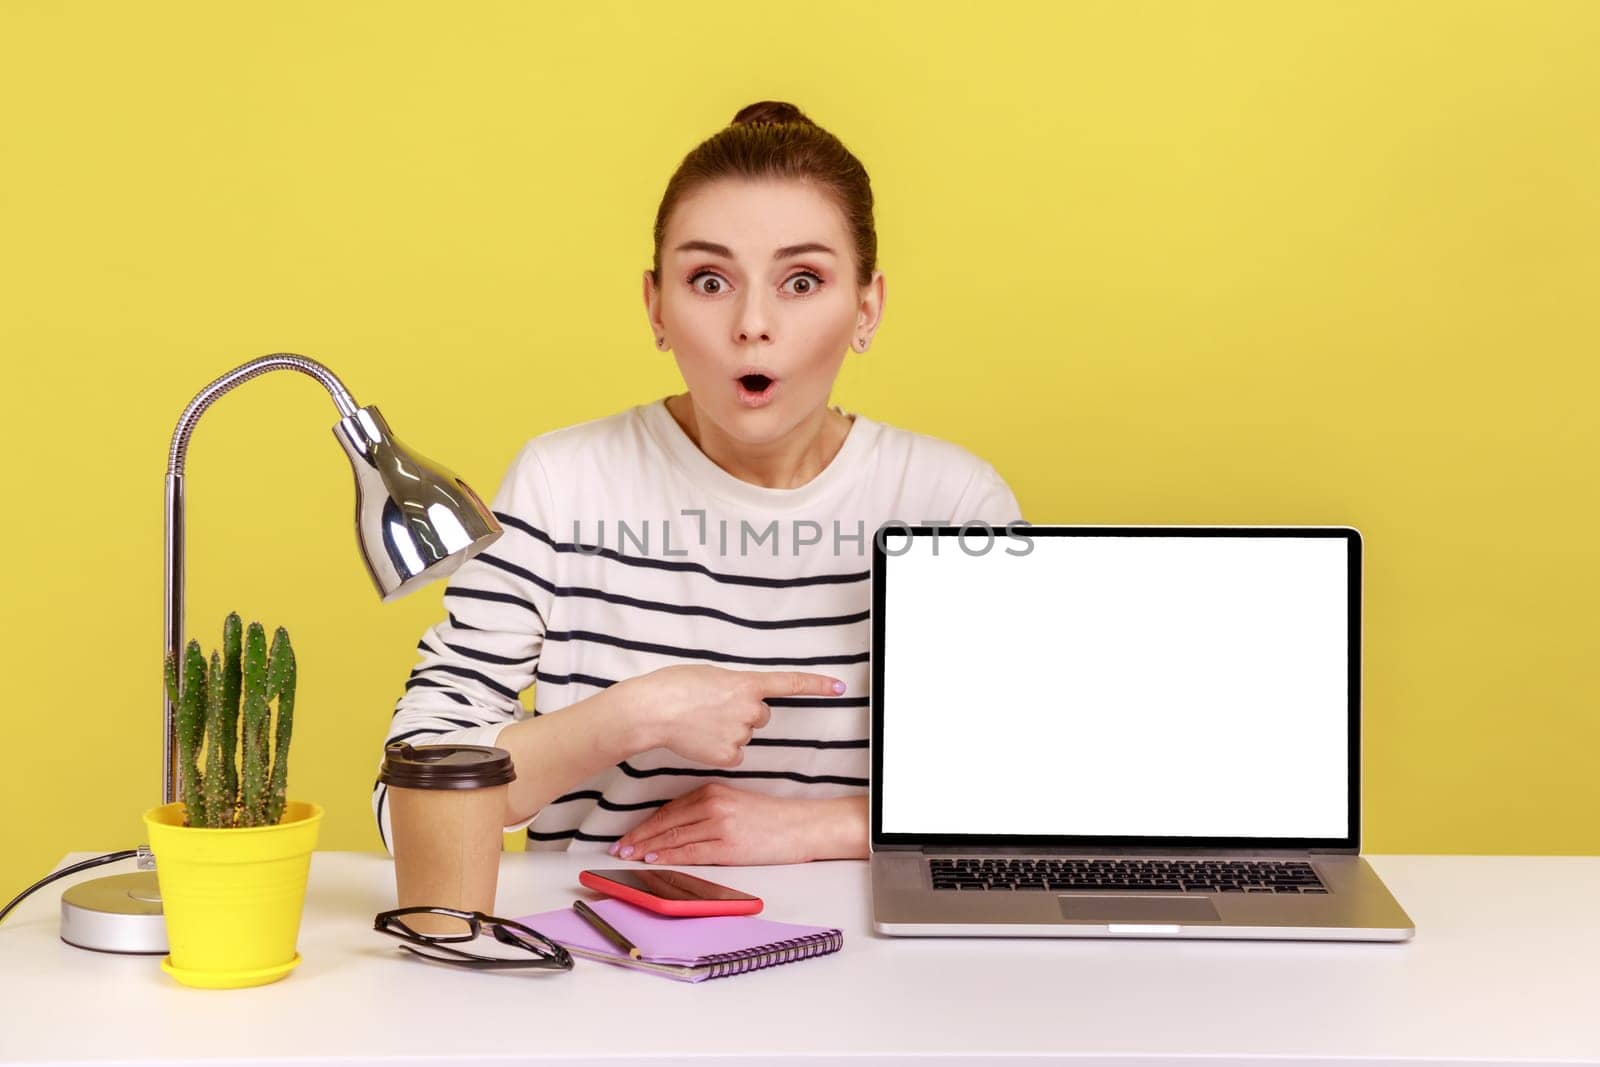 Shocked amazed young woman employee pointing empty laptop screen, mock up display for advertisement, online service, website promotion. Indoor studio studio shot isolated on yellow background.